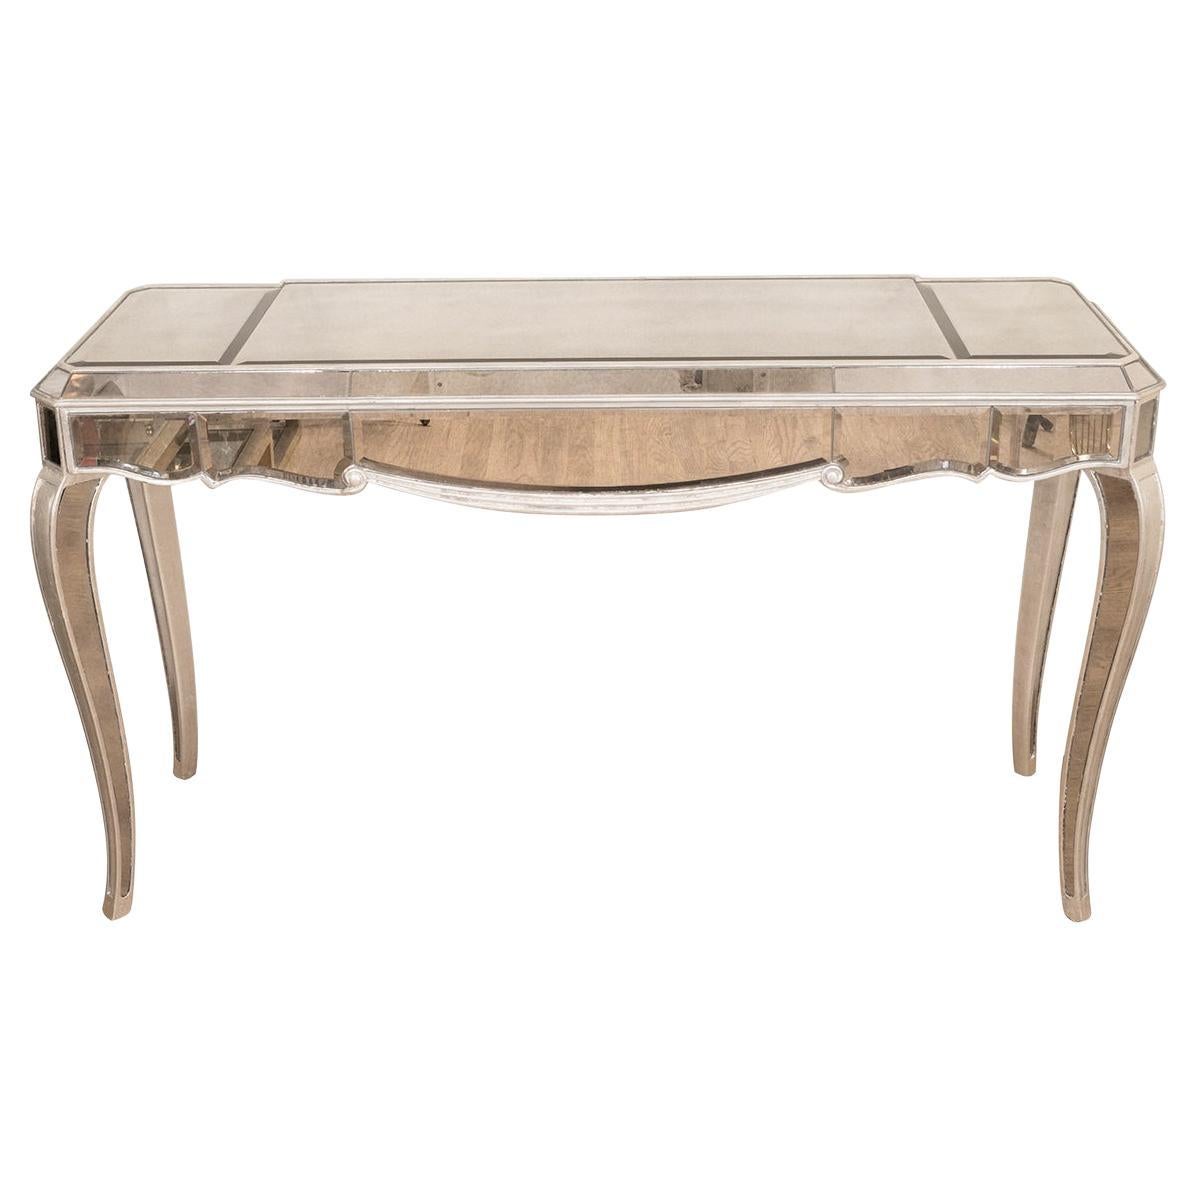 Silver leafed wood and mirror vanity table